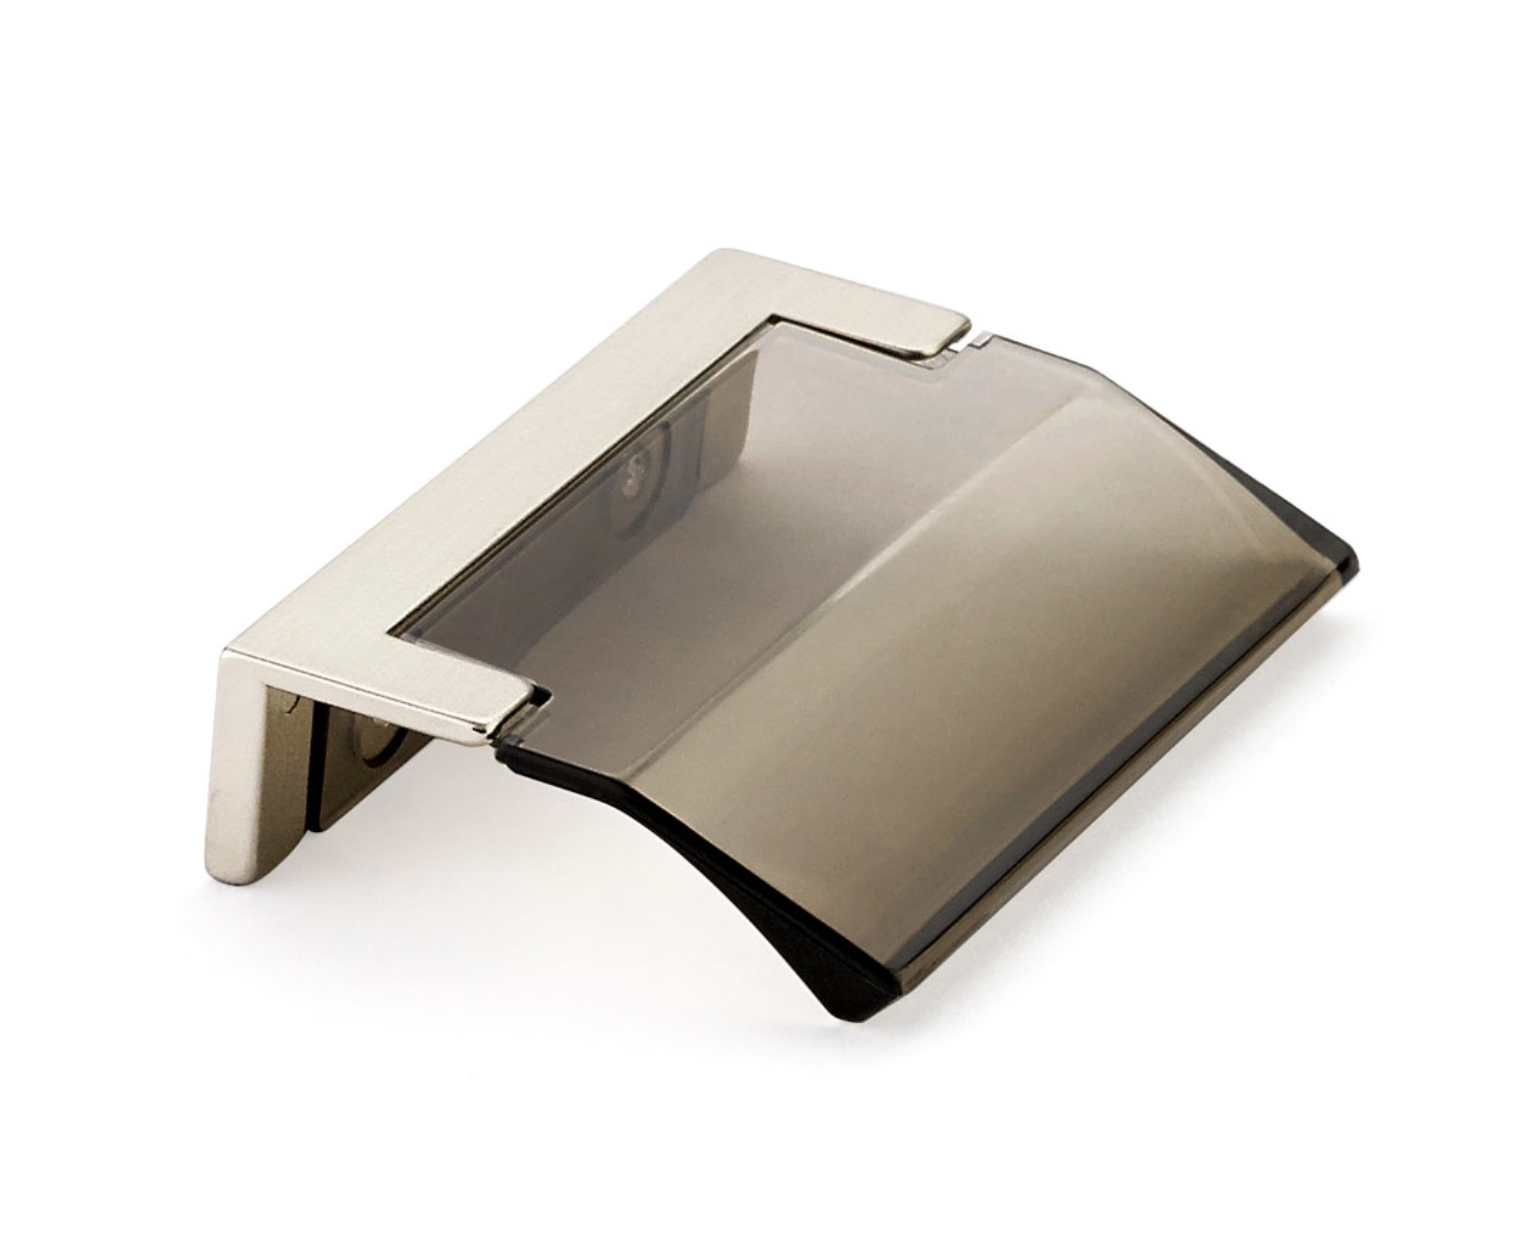 Satin Nickel "Ponce" Smoked Glass Edge Drawer Pull - Industry Hardware